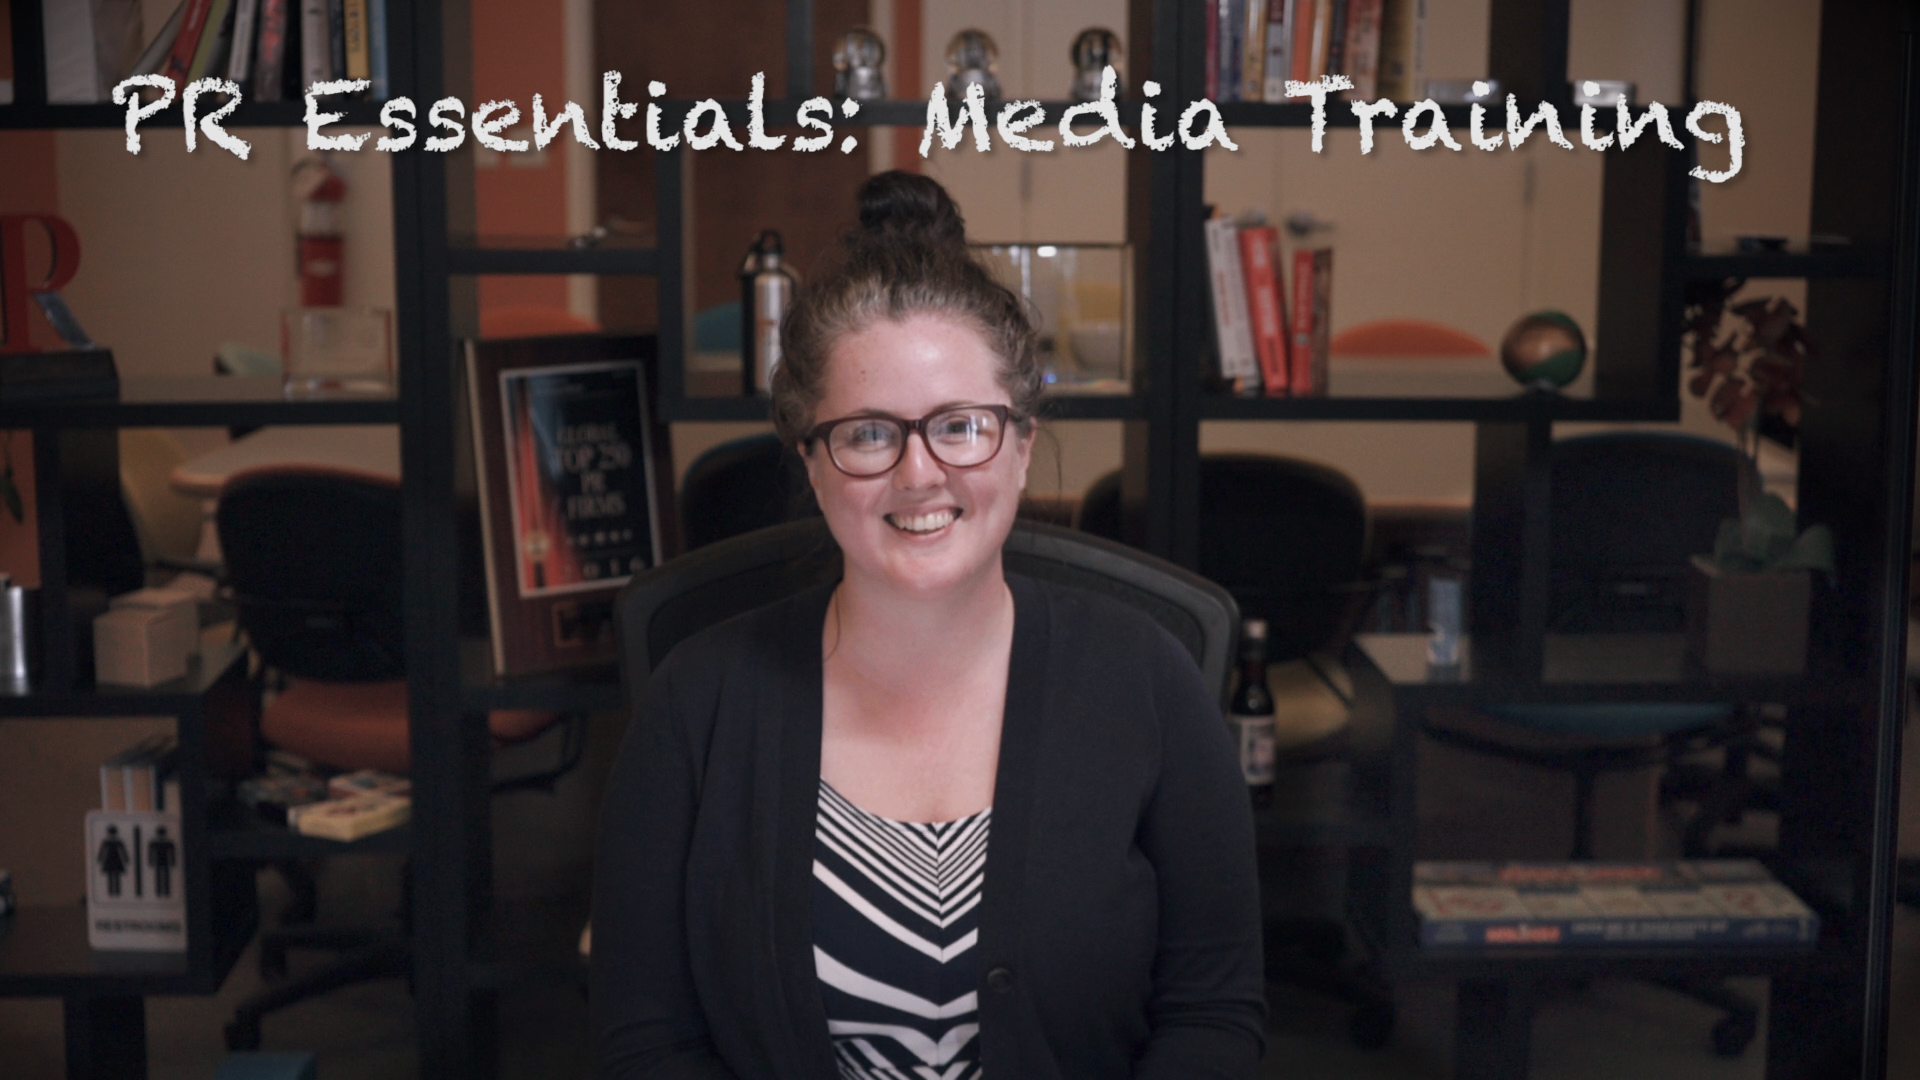 [Video] Media Training is a Must in PR Today